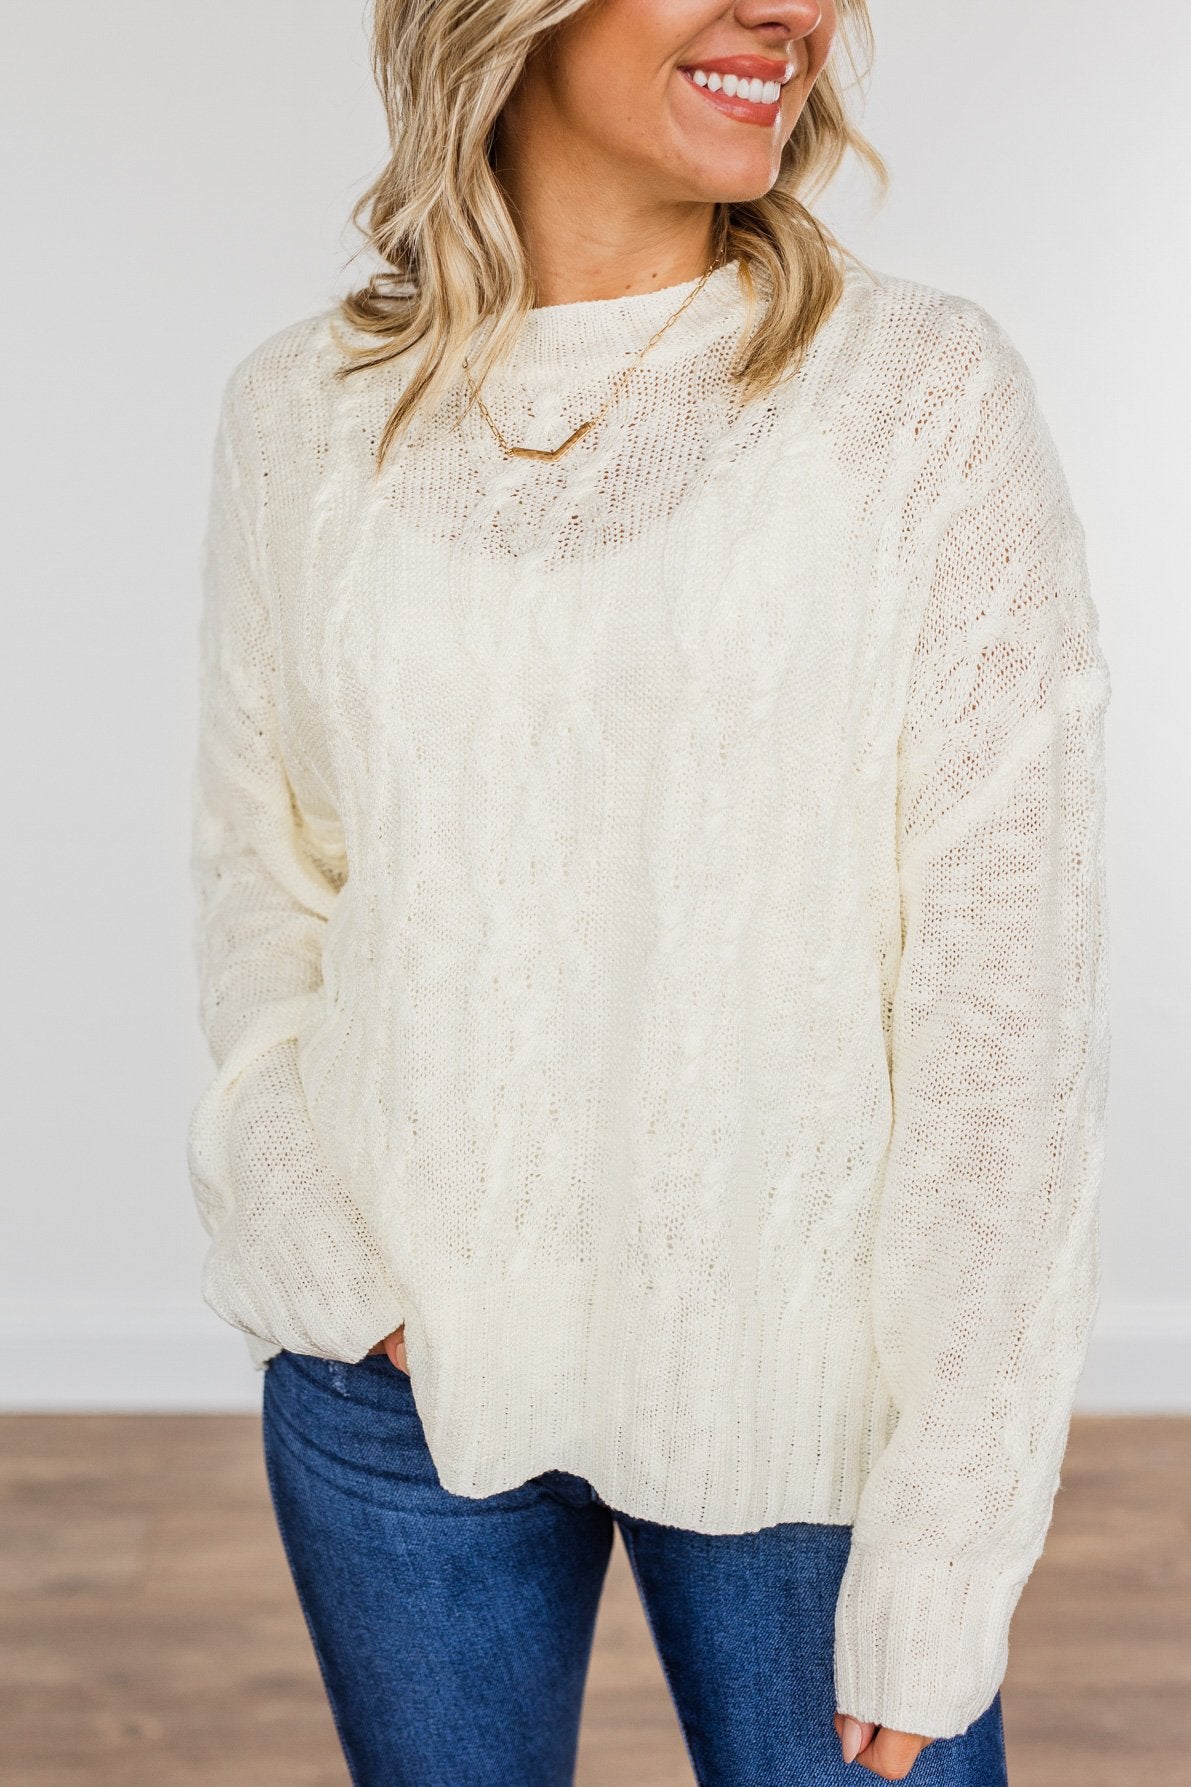 Smile For Me Knit Sweater- Ivory